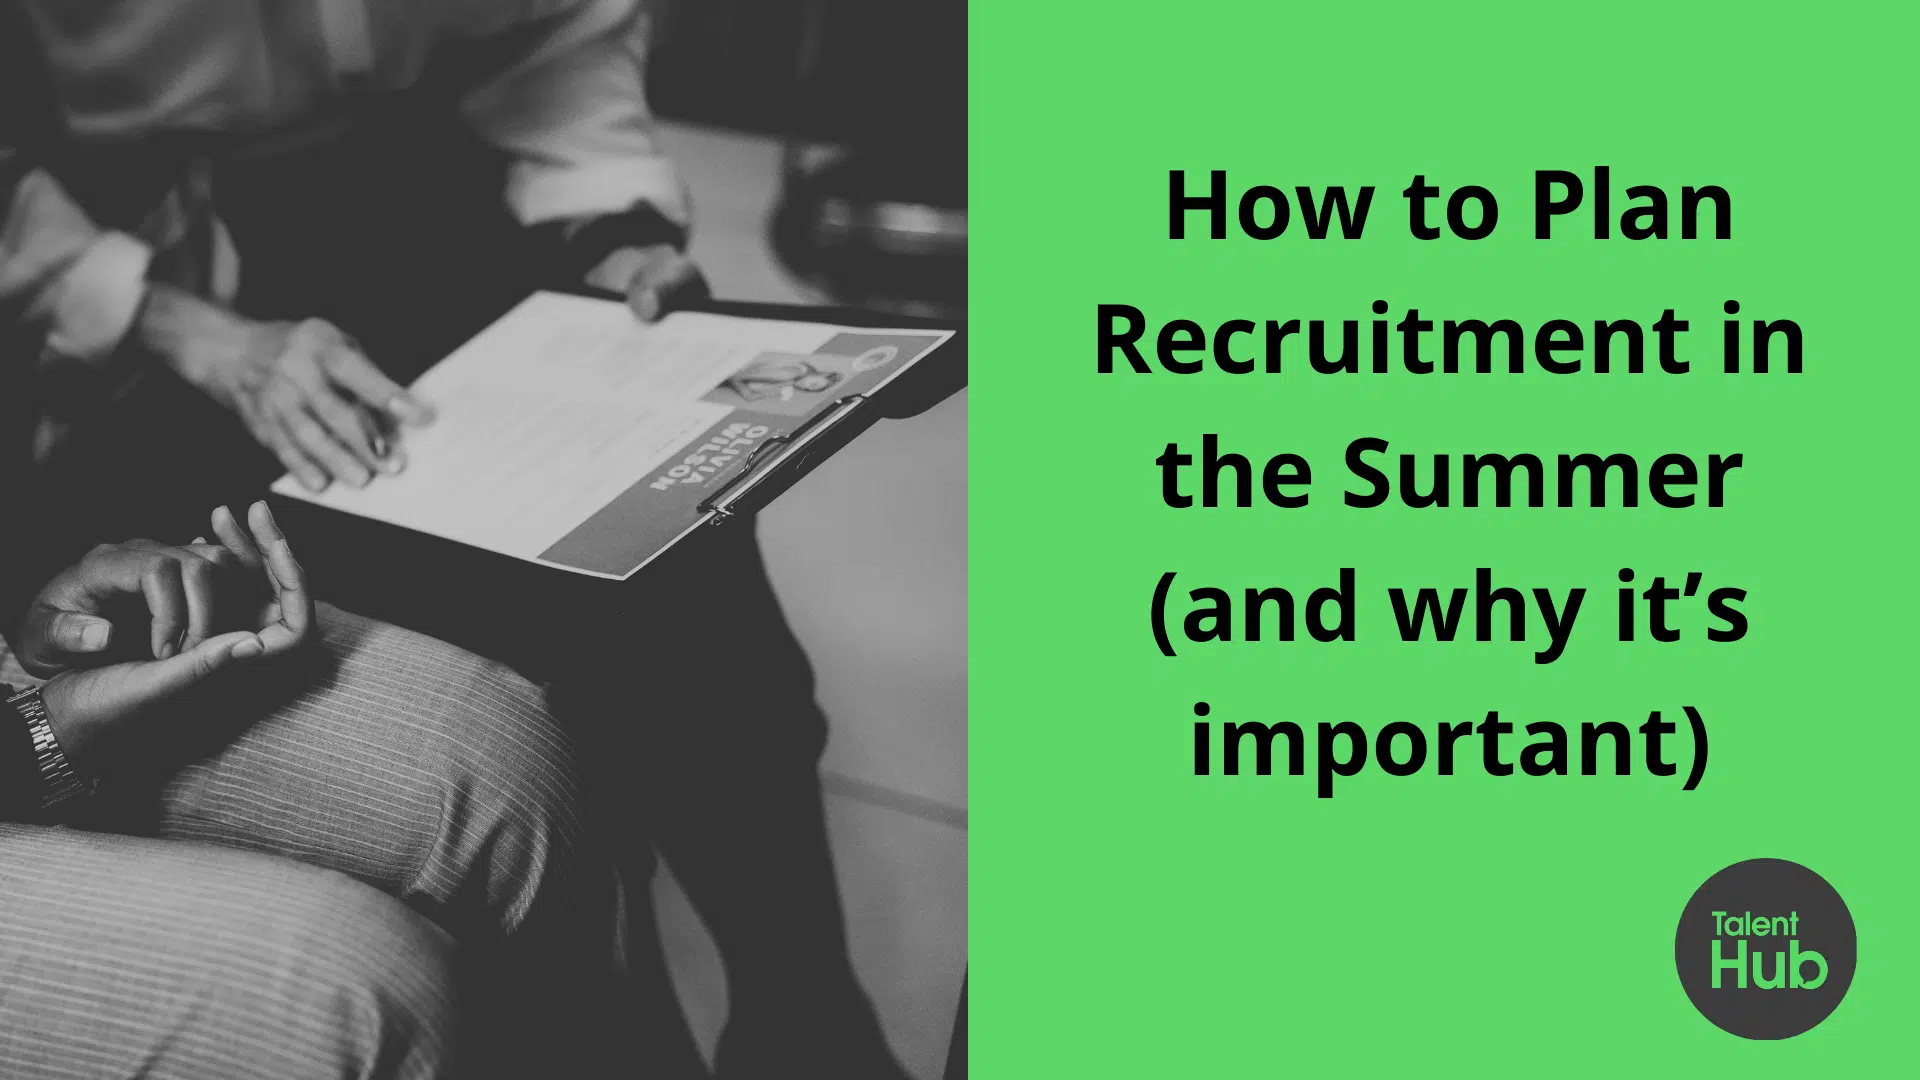 How to plan recruitment in the summer